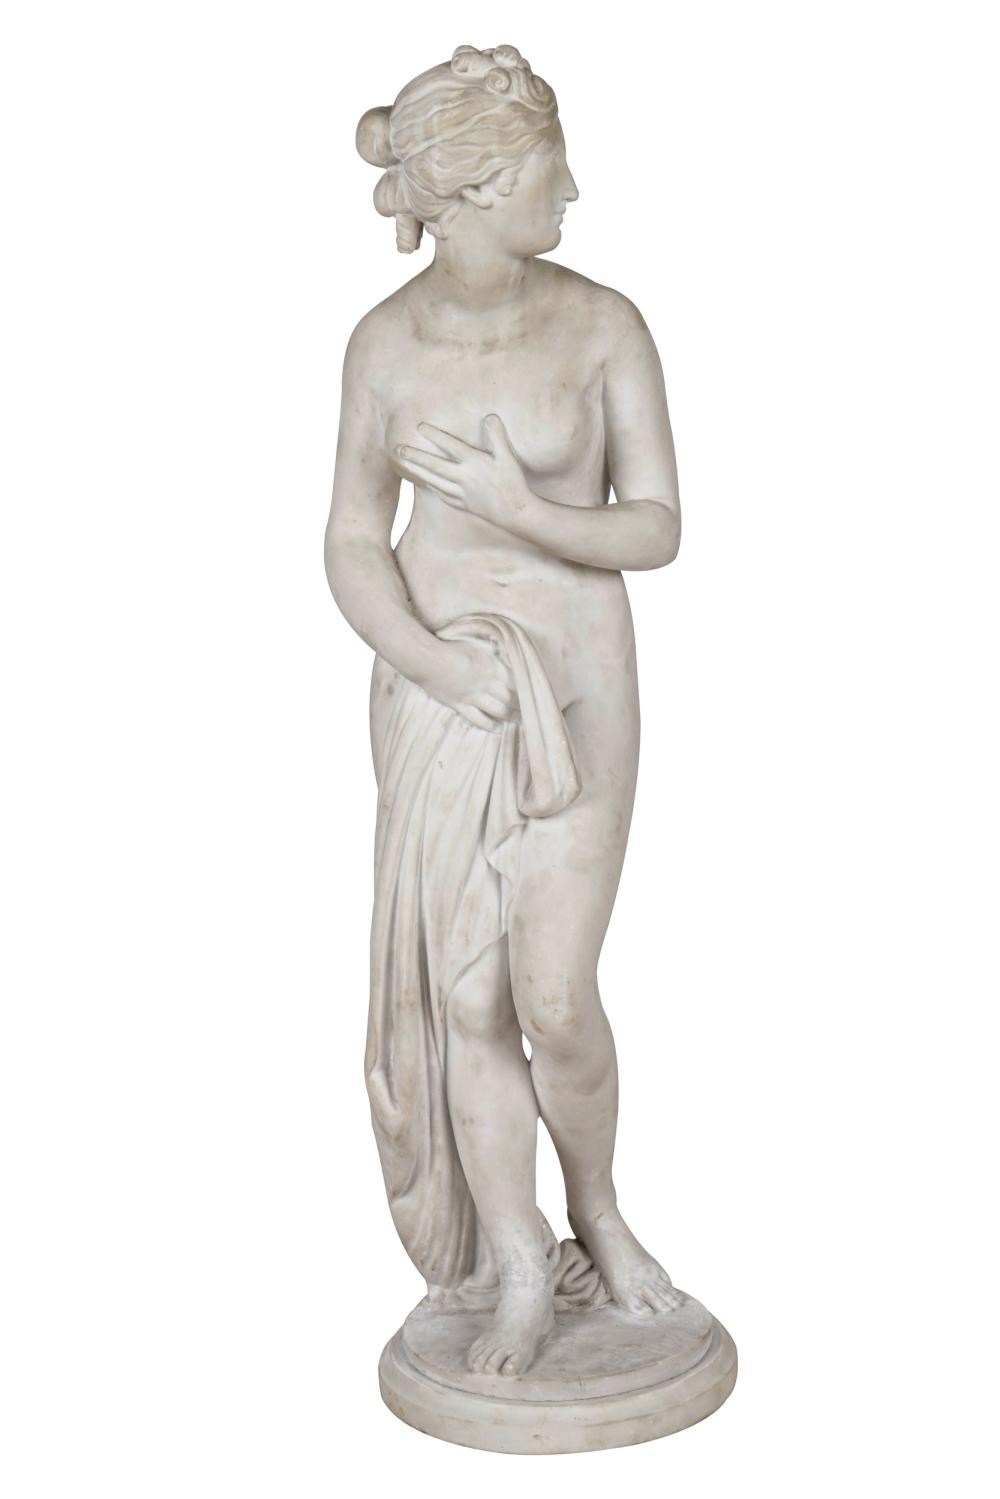 ITALIAN MARBLE FIGURE OF A GIRLProvenance: